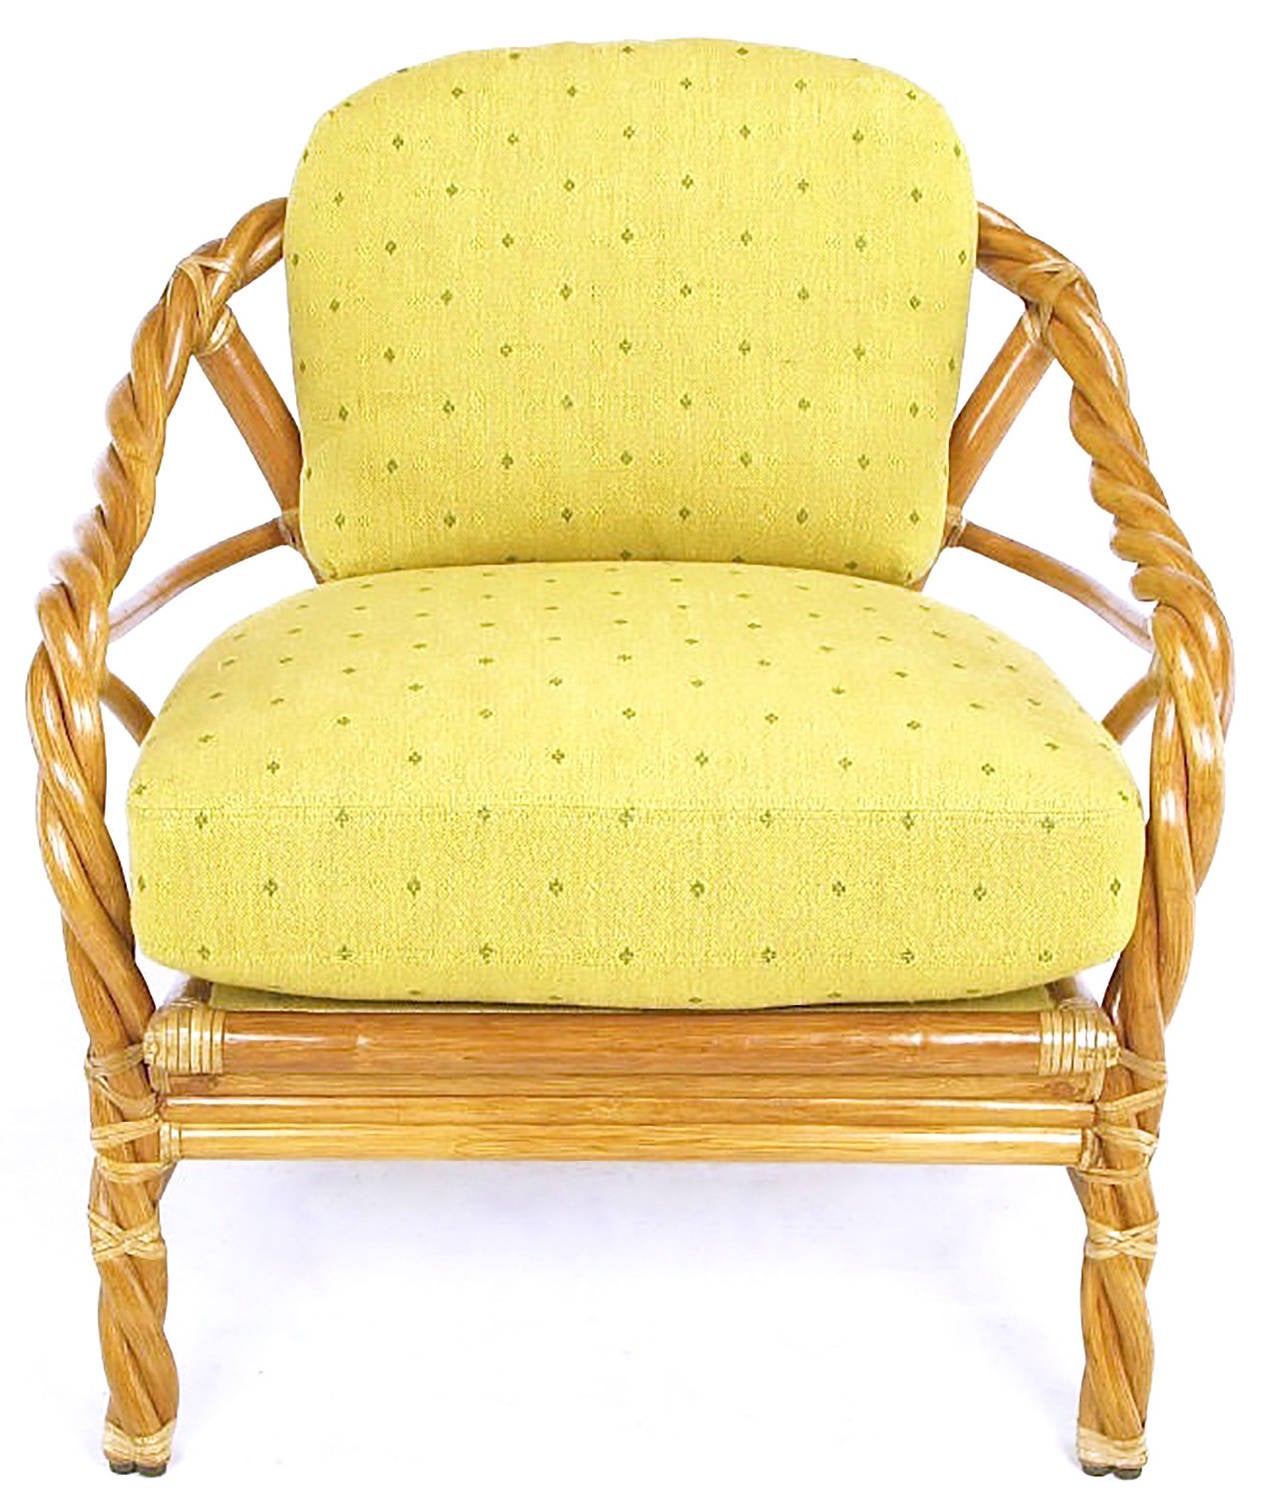 Made of twisted and bent rattan wrapped and joined with real rawhide, this vintage McGuire arm chair comes with saffron yellow patterned twill upholstery. The back cushion is down filled and the seat is very high grade foam.